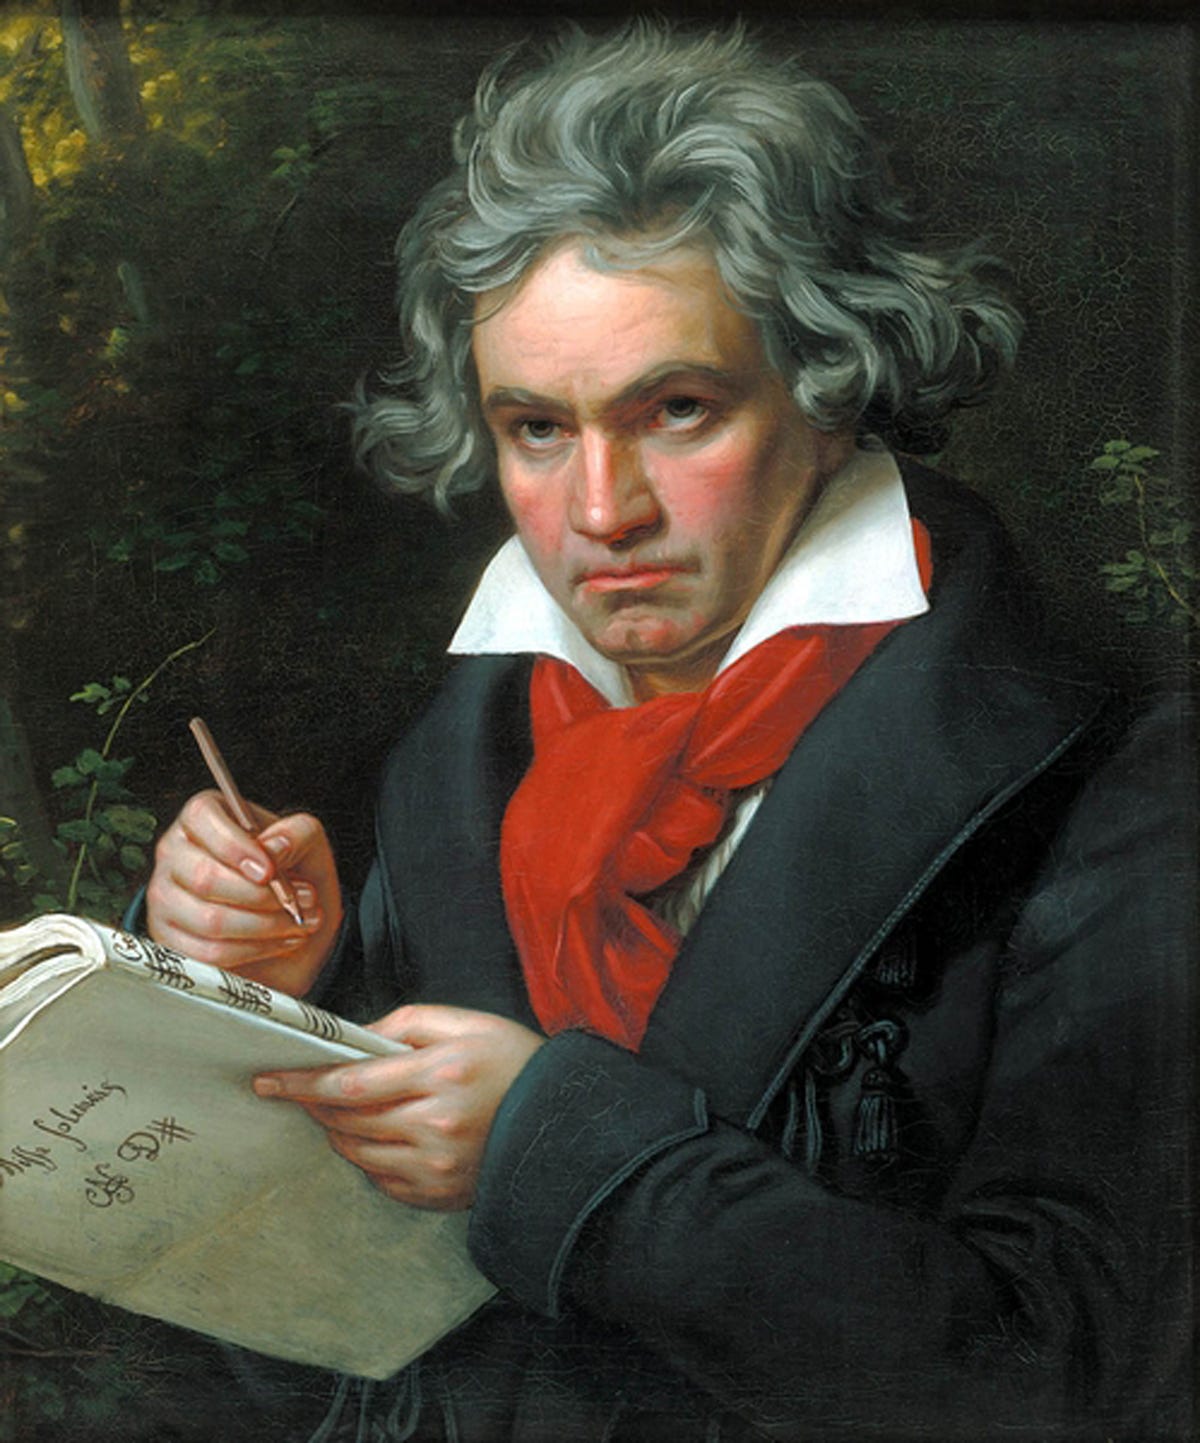 Beethoven's locks of hair hold clues to his musical genius